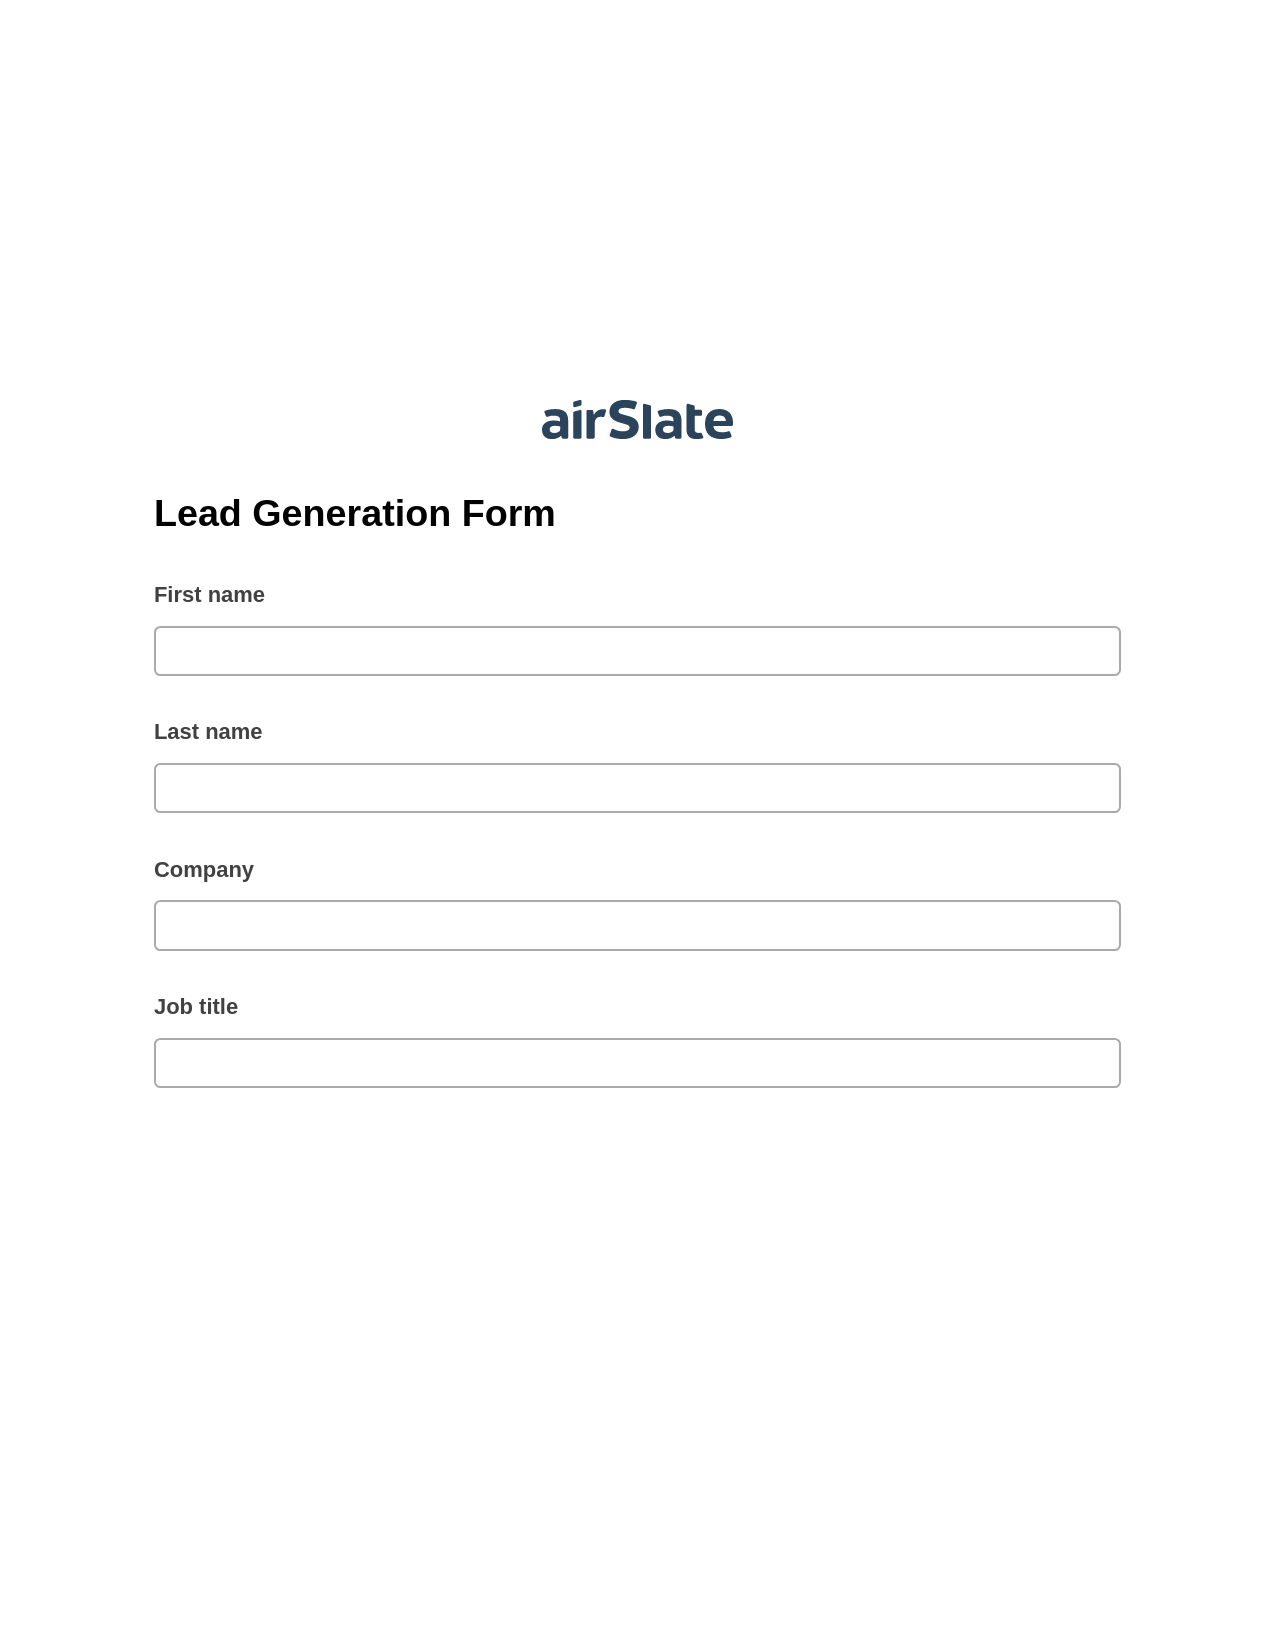 Lead Generation Form Pre-fill Document Bot, Add Tags to Slate Bot, Export to NetSuite Bot